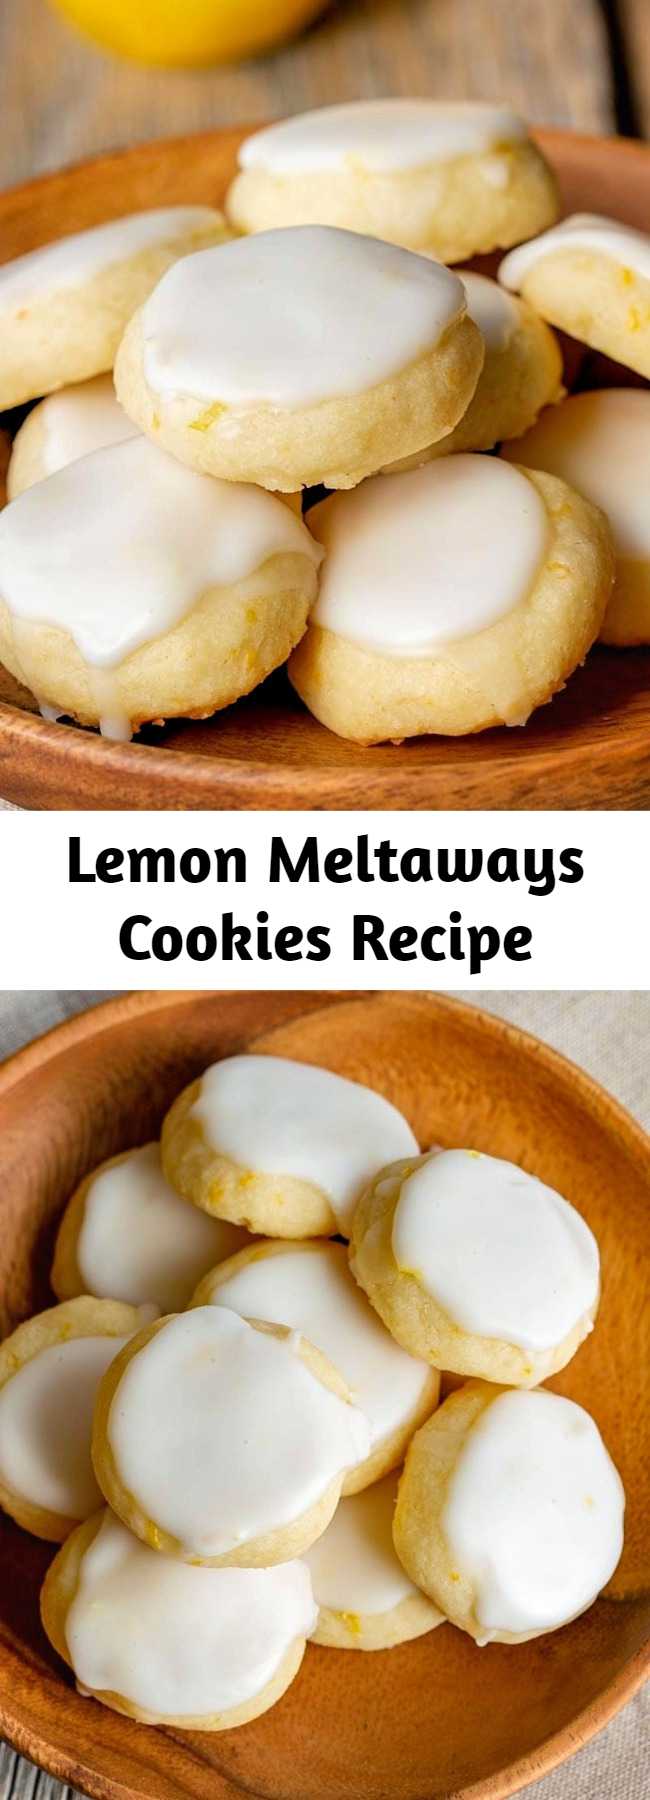 Lemon Meltaways Cookies Recipe - Light and buttery, these bite-sized lemon cookies are a real treat!